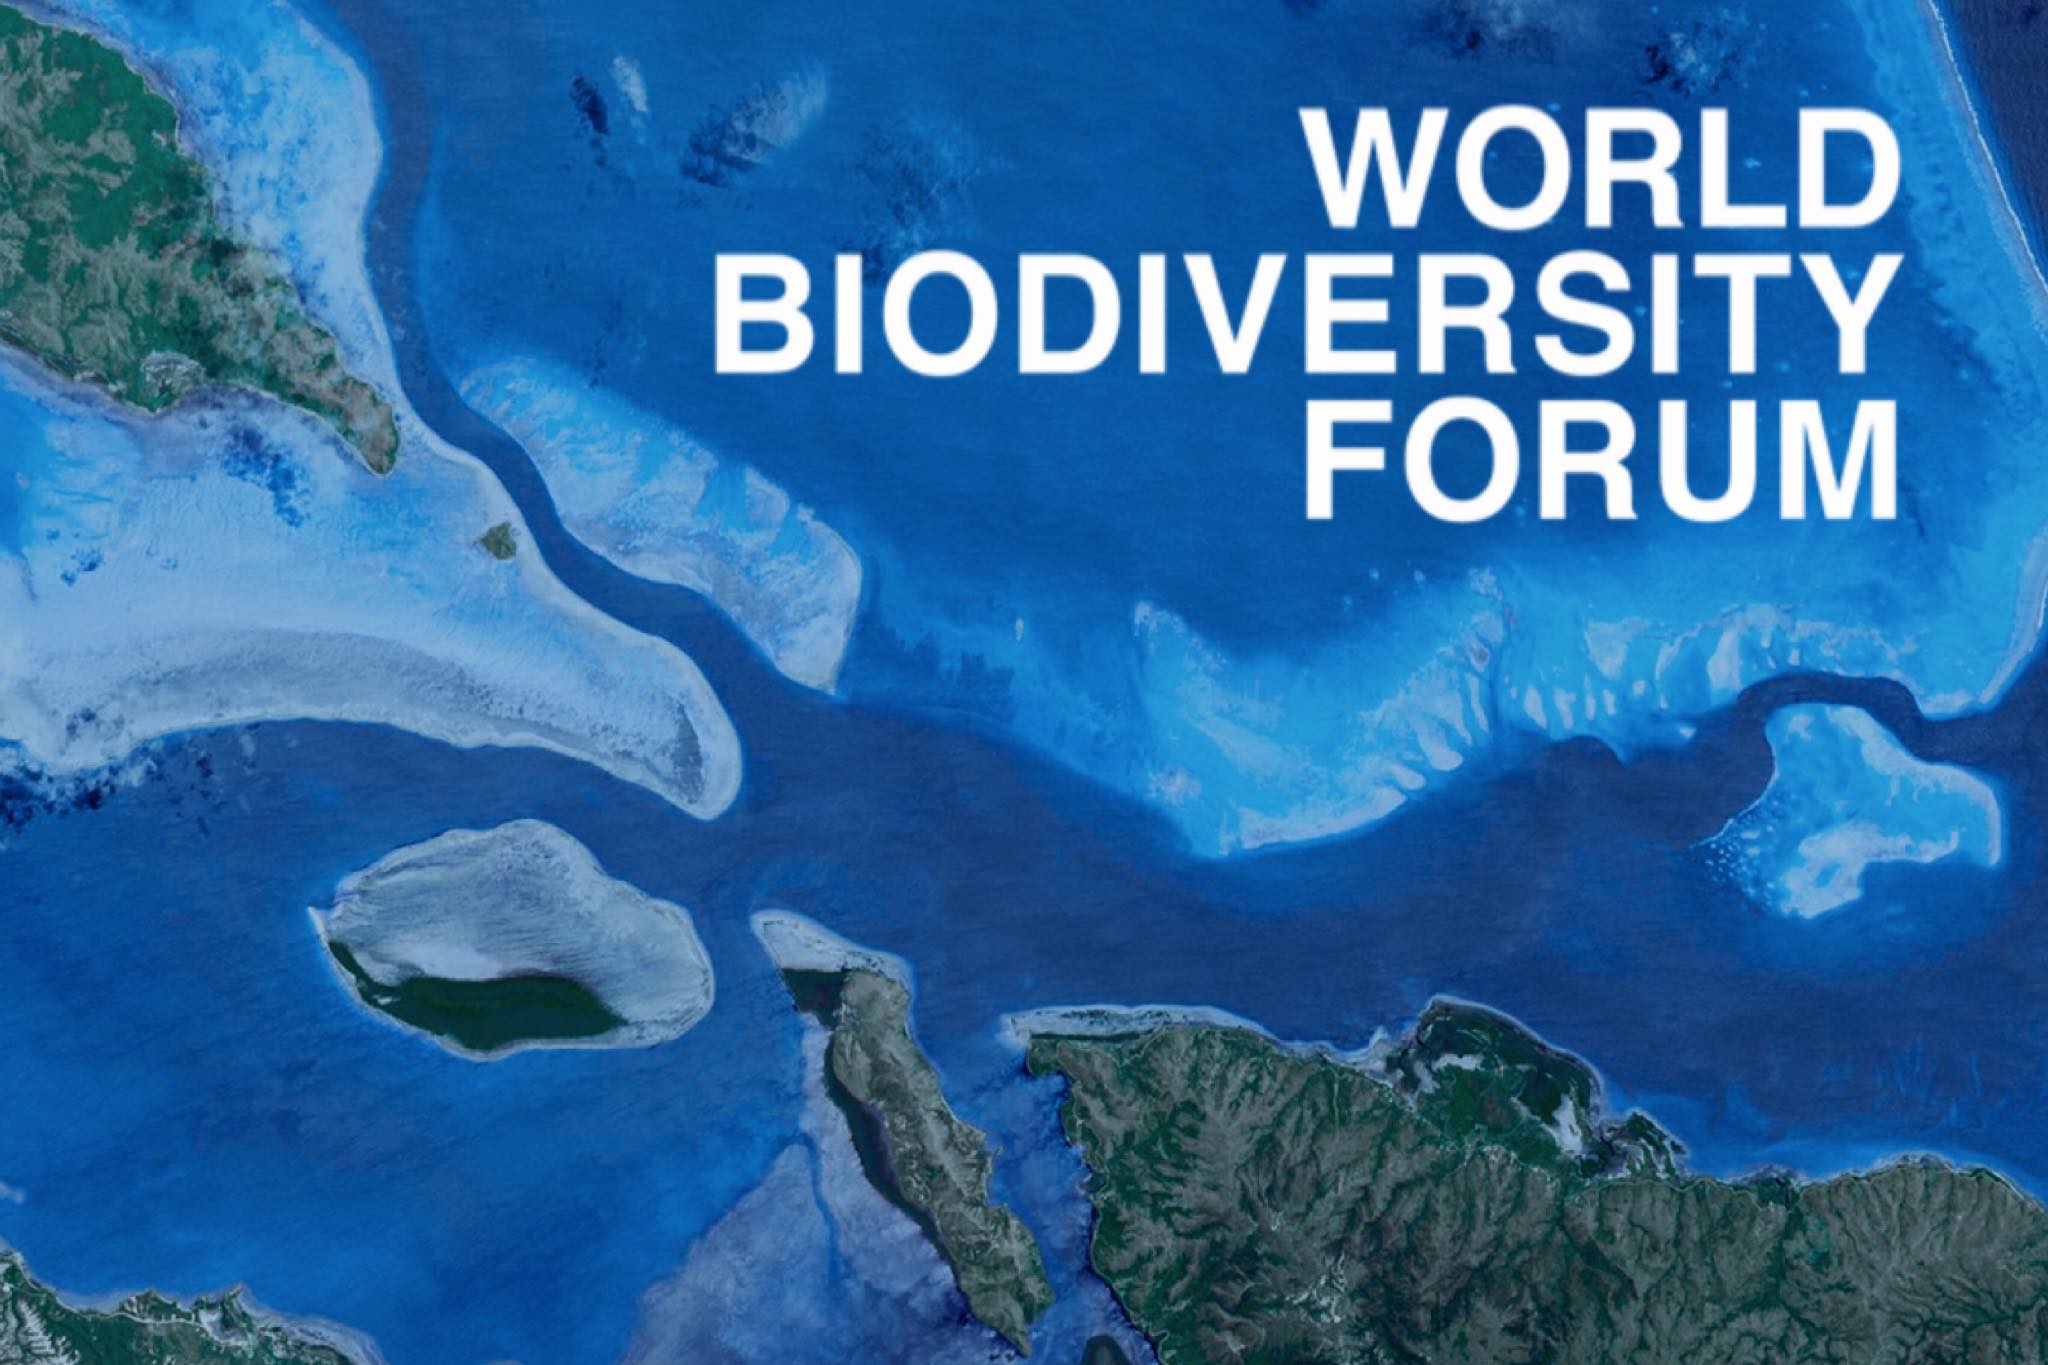 The World Biodiversity Forum Announces New Virtual Convention in January 2021, Advised by the Convention on Biological Diversity and in Collaboration with TEALEAVES